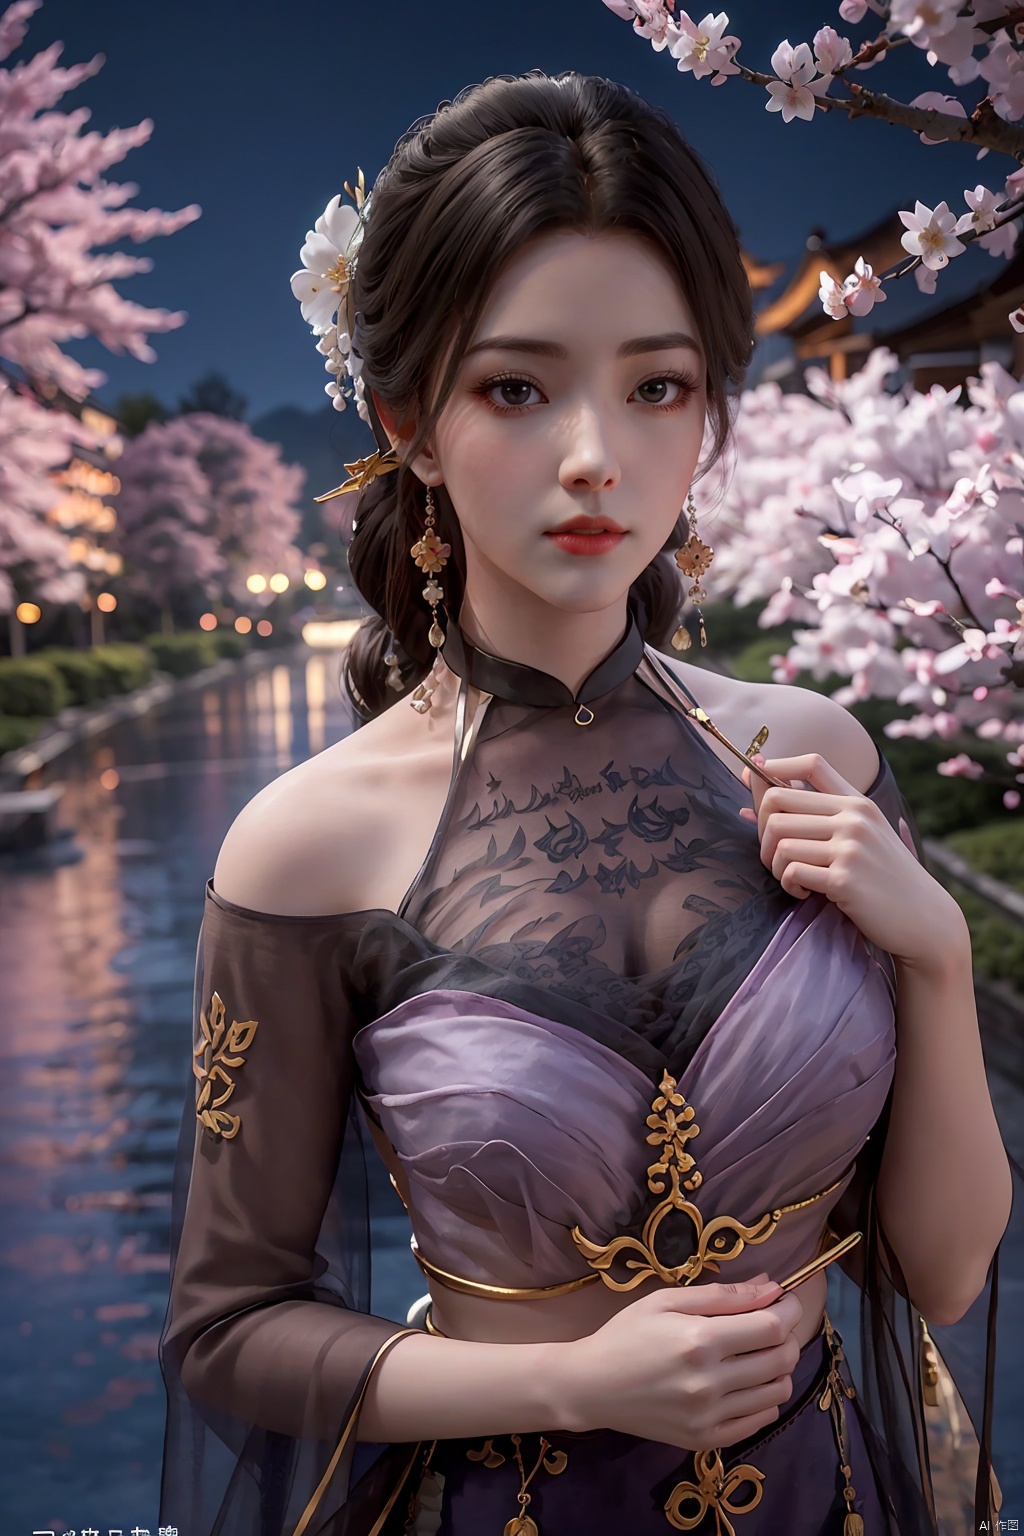  Upper body, panoramic view, exploring cherry blossom branches, fairyland, light blue elements, night, side light shining on the face,Xlujiejie